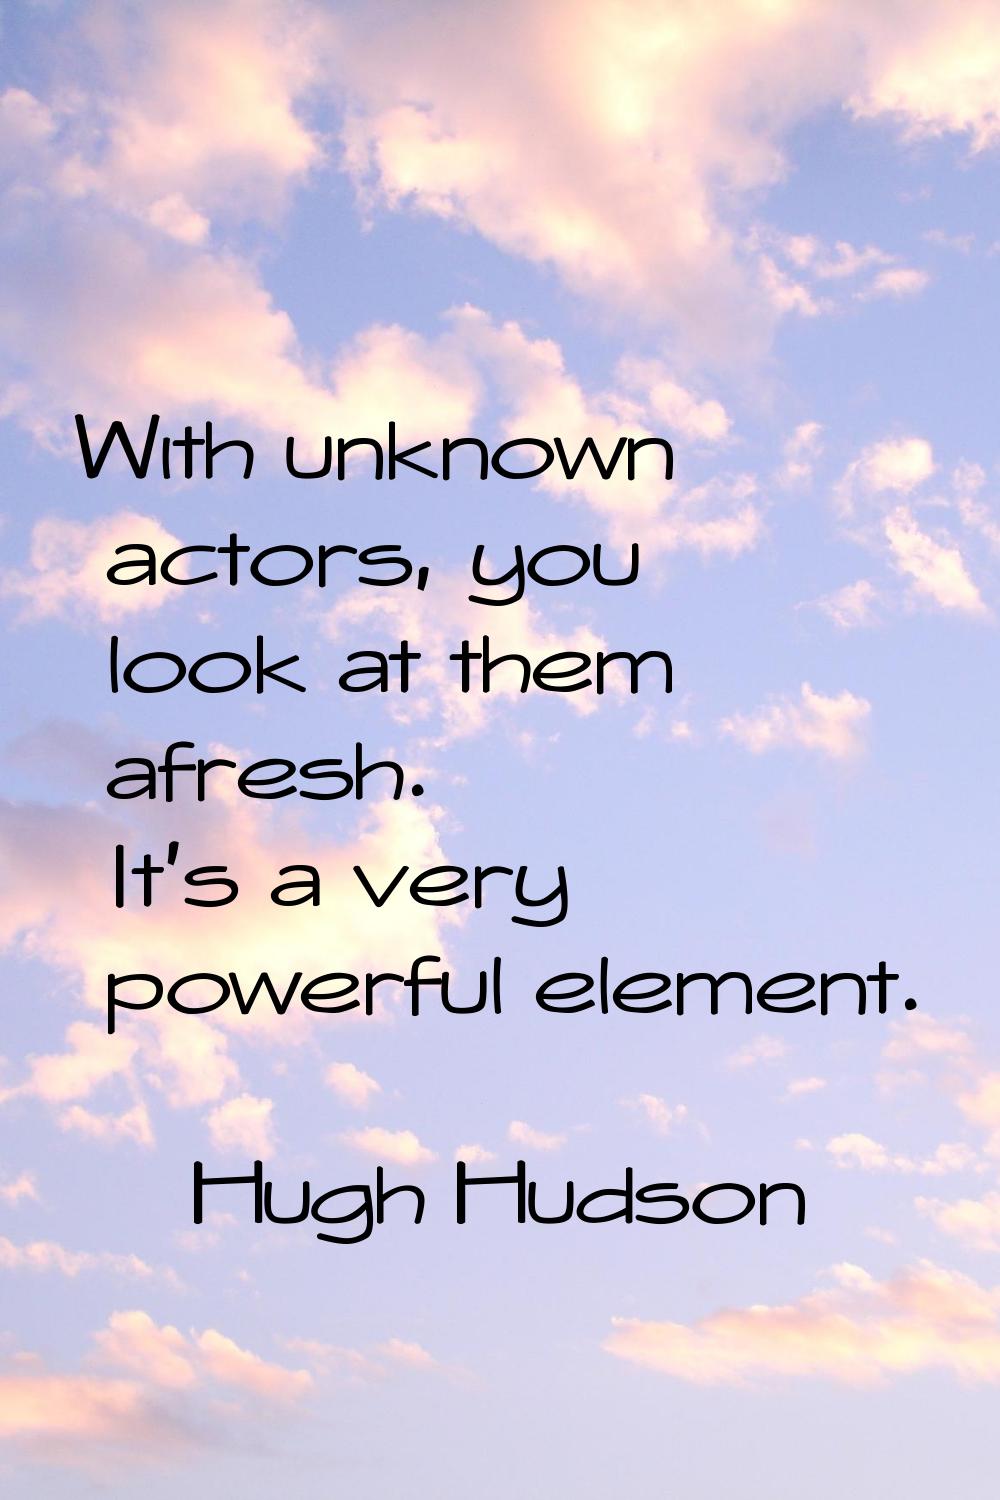 With unknown actors, you look at them afresh. It's a very powerful element.